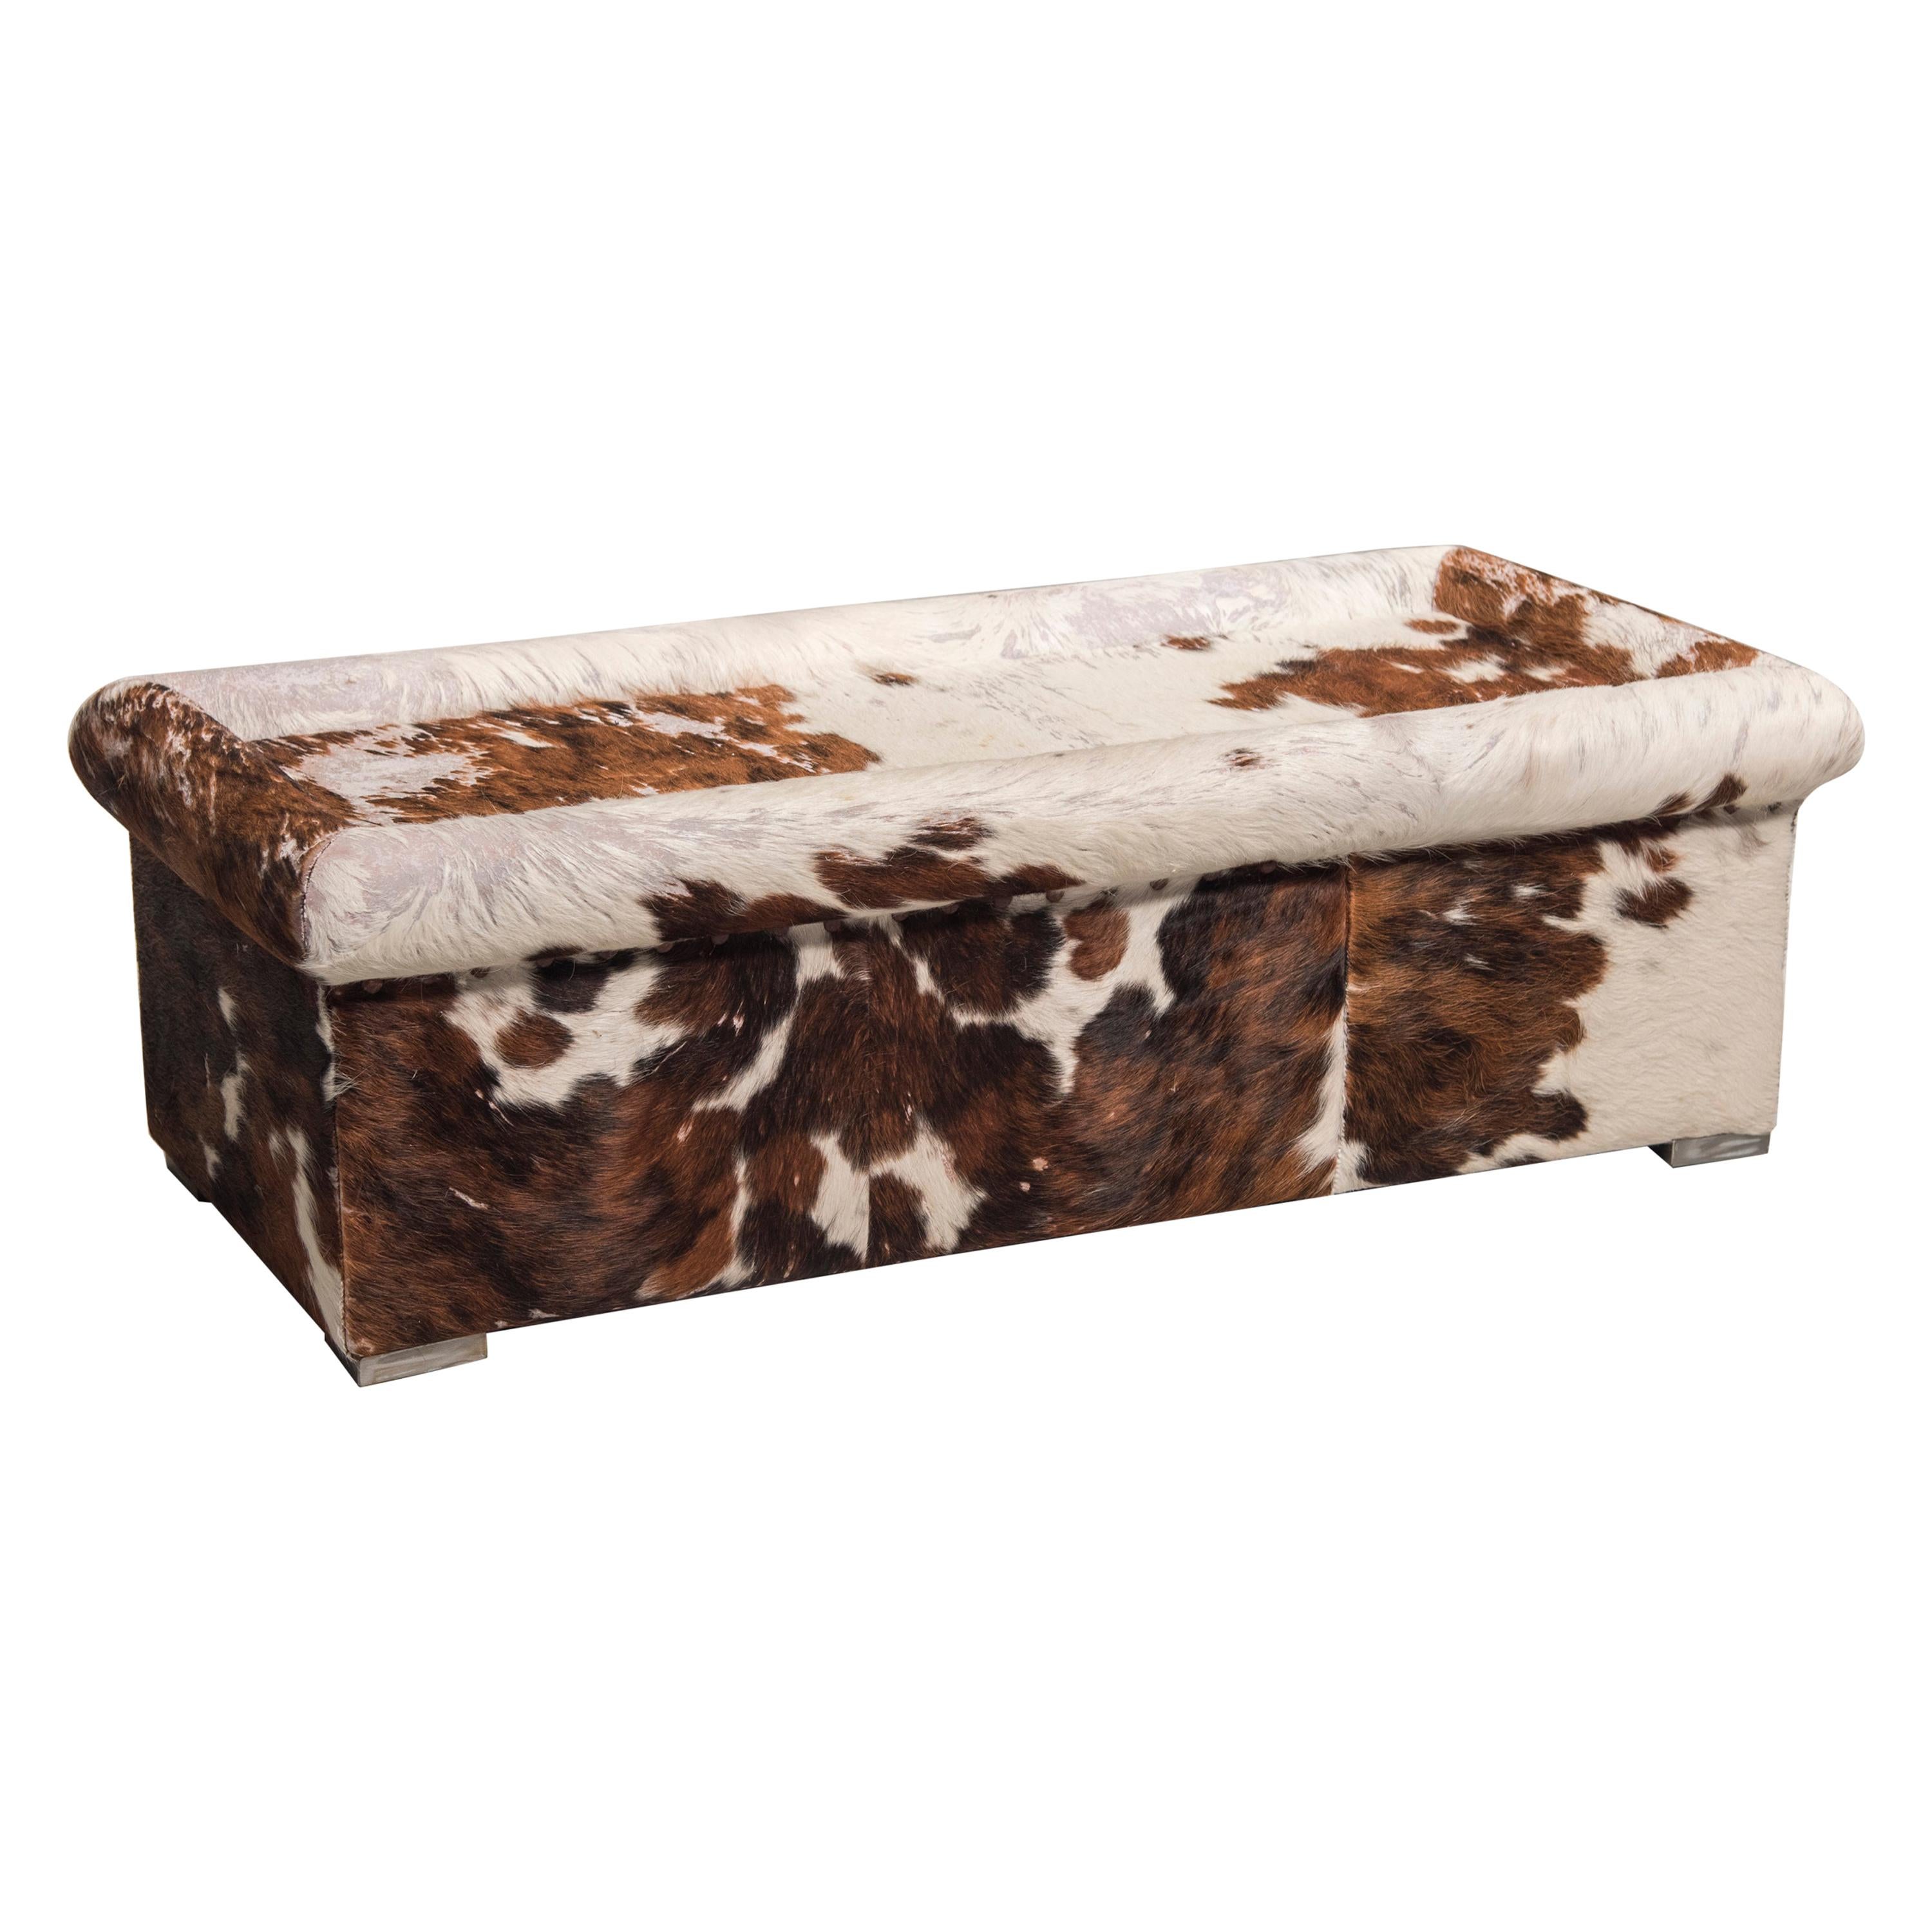 Baxter Brown and White Cow Fur Leather Ottoman or Coffee Table, Italy, 1990s